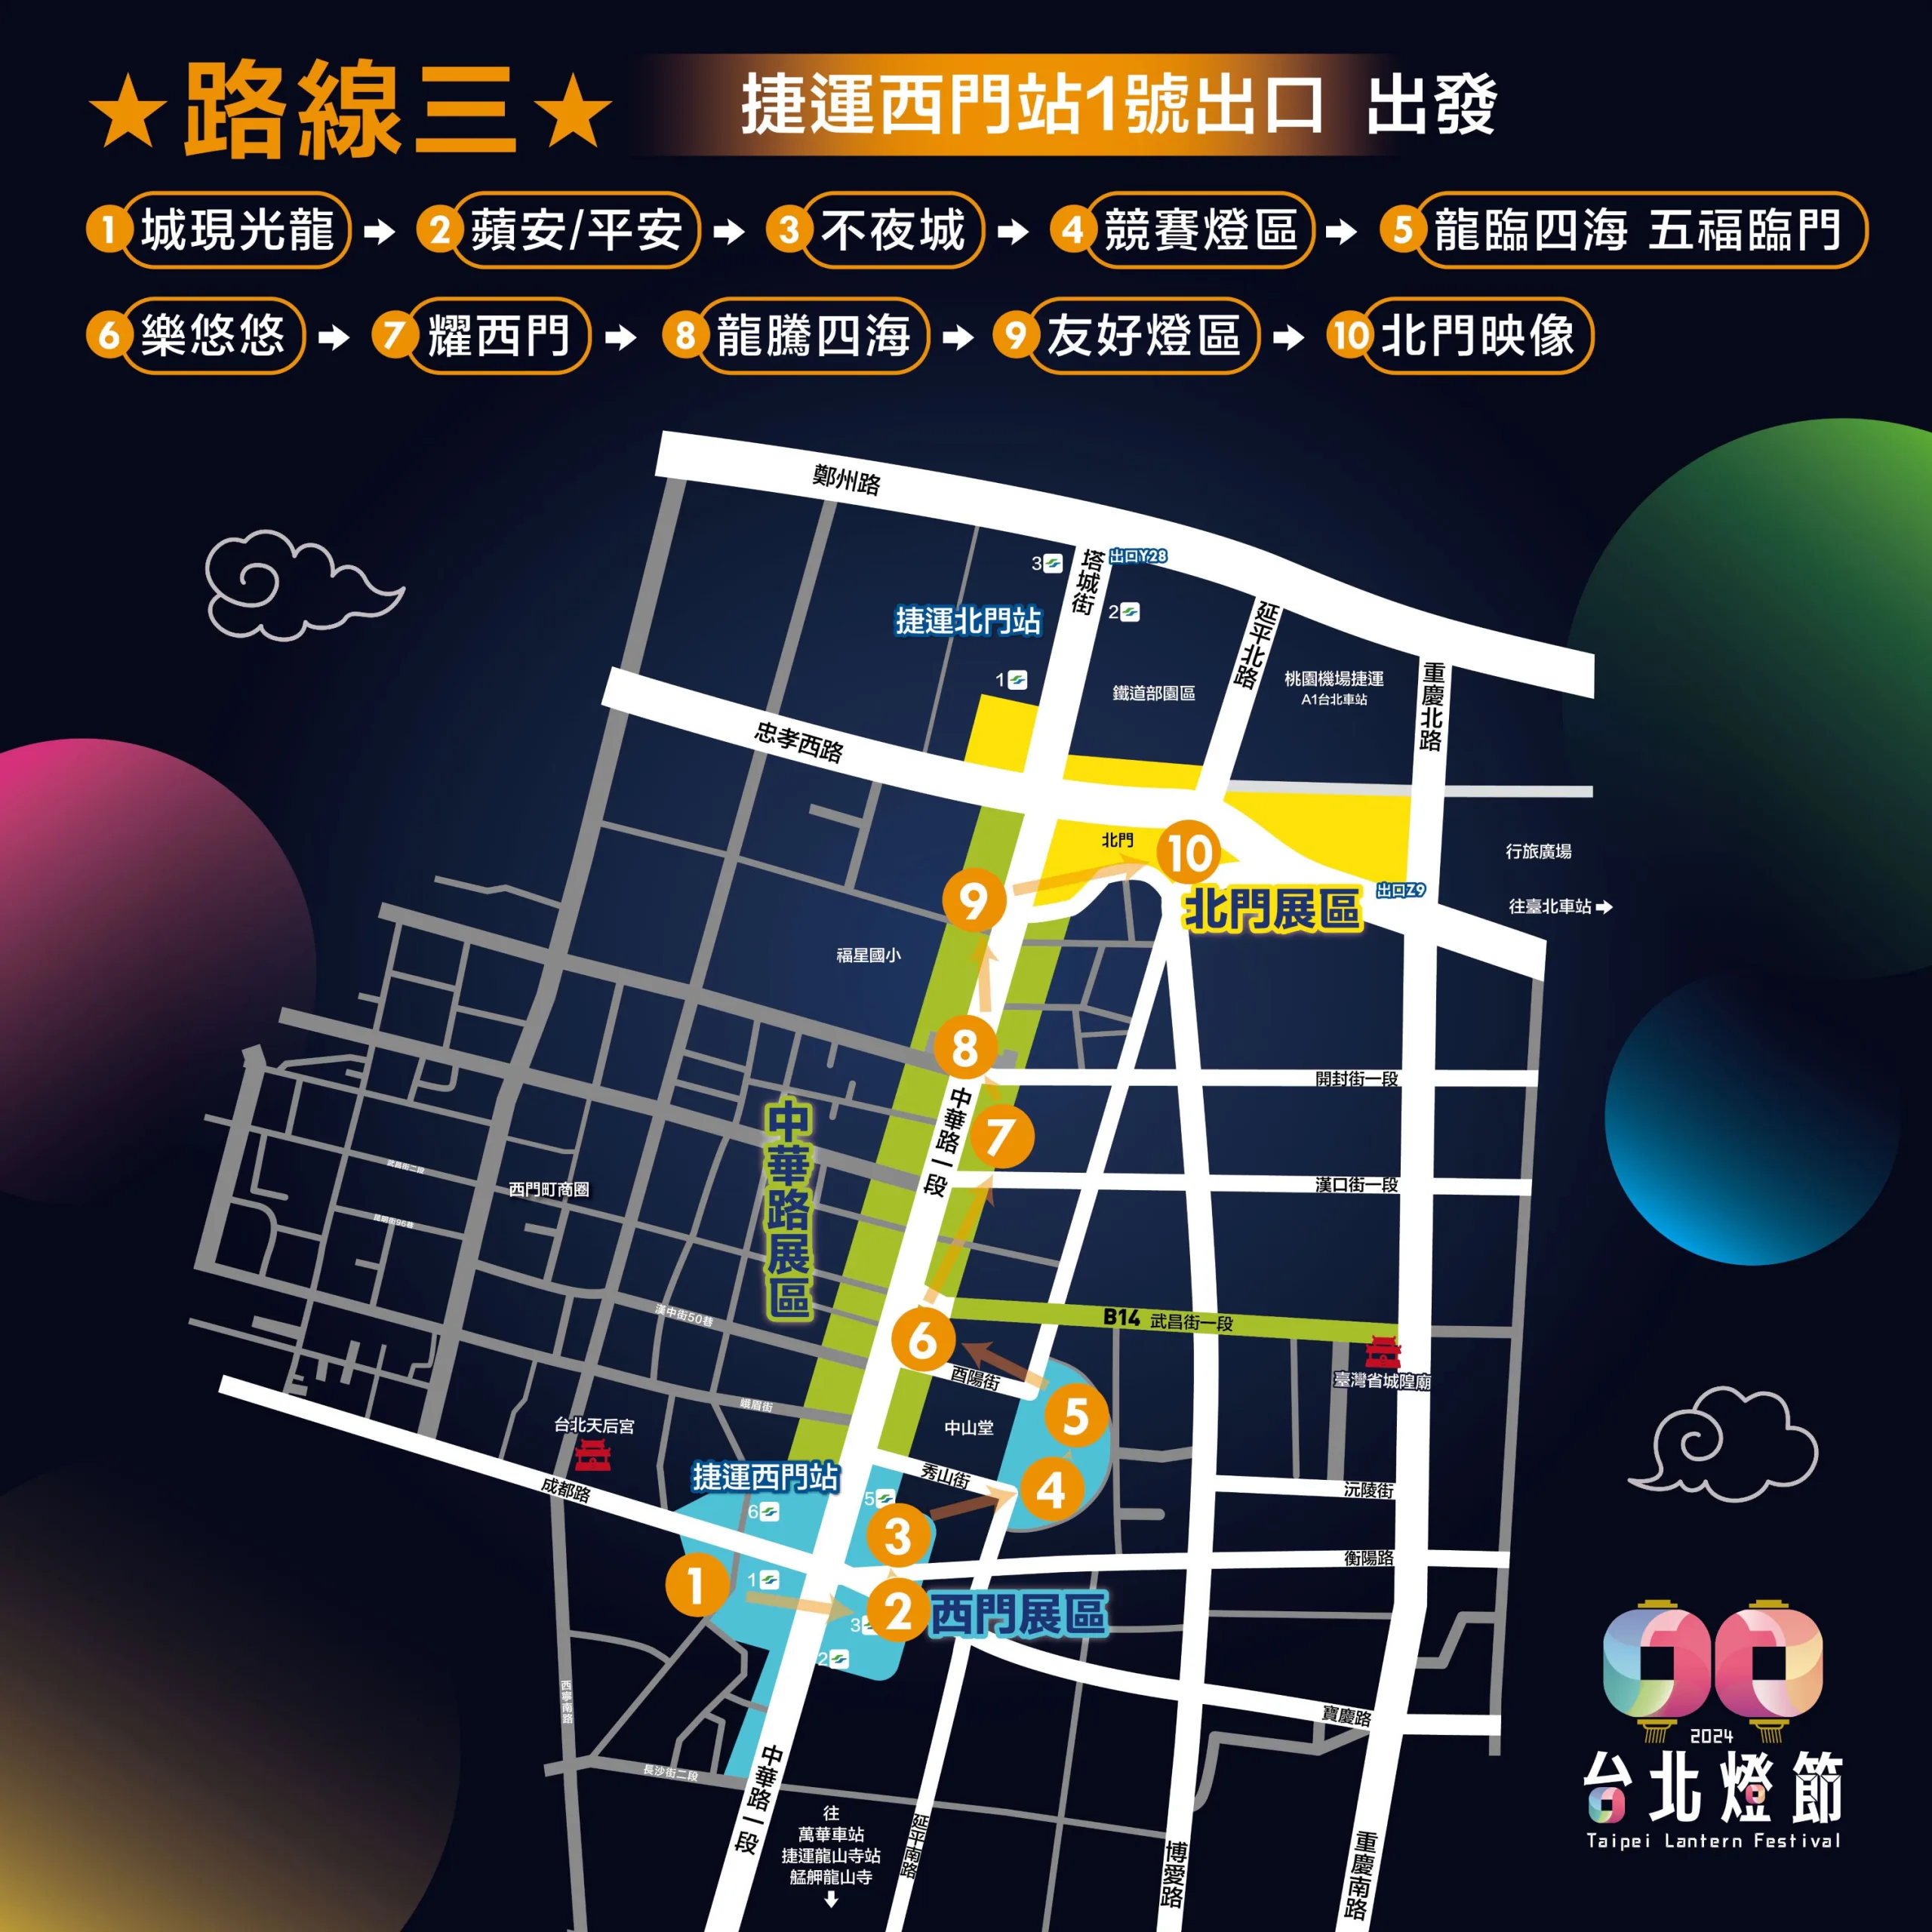 Lantern viewing route 3 Starting from MRT Ximen Station